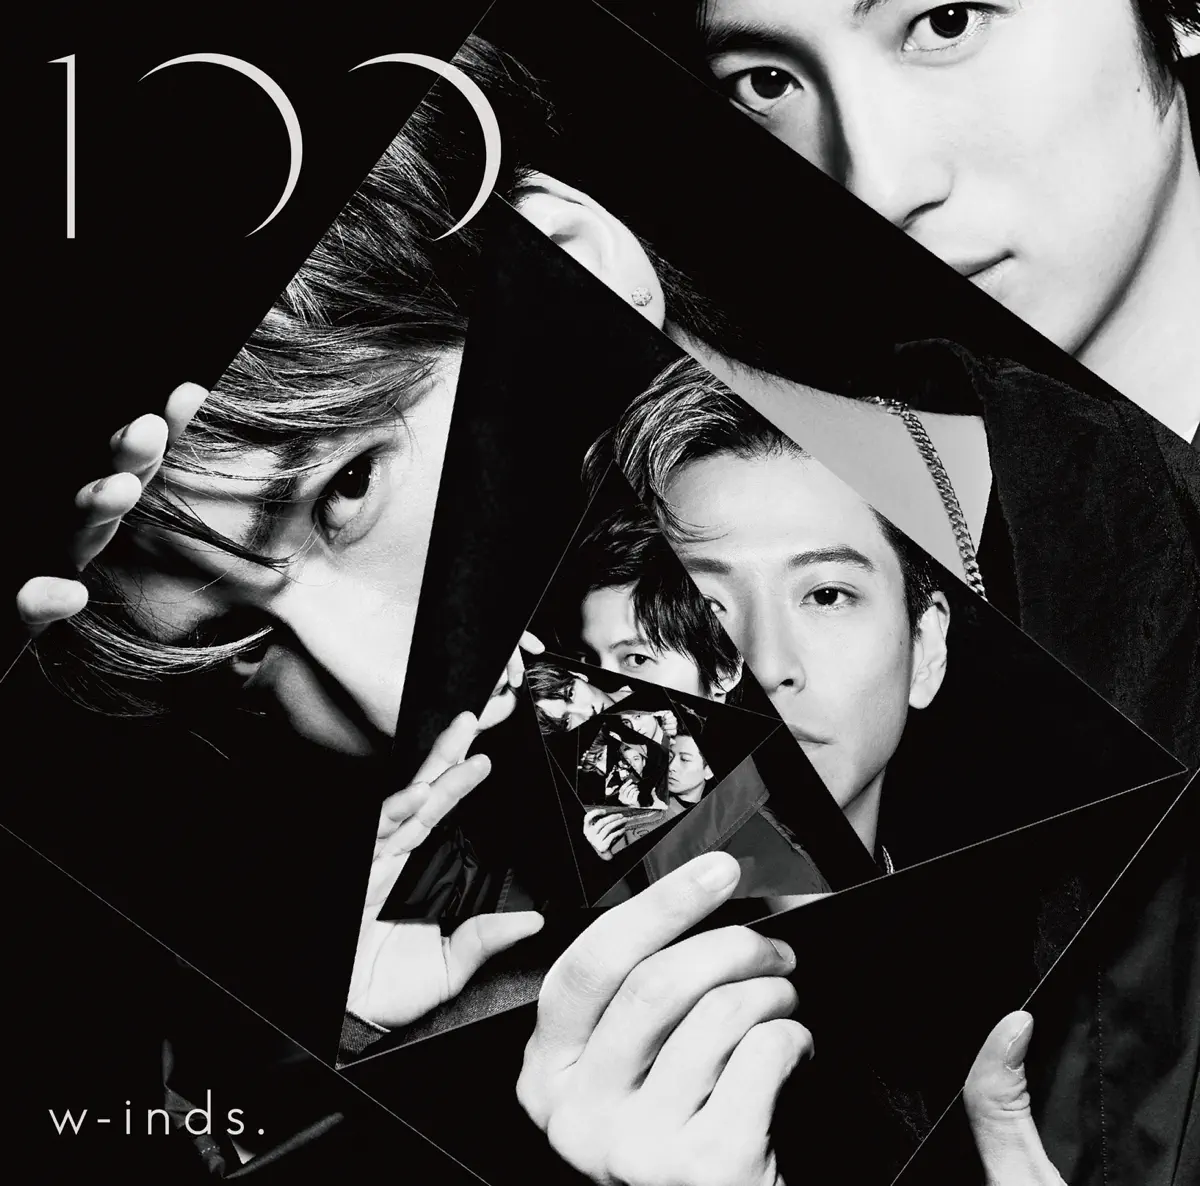 w-inds. - 100 (2018) [iTunes Plus AAC M4A]-新房子